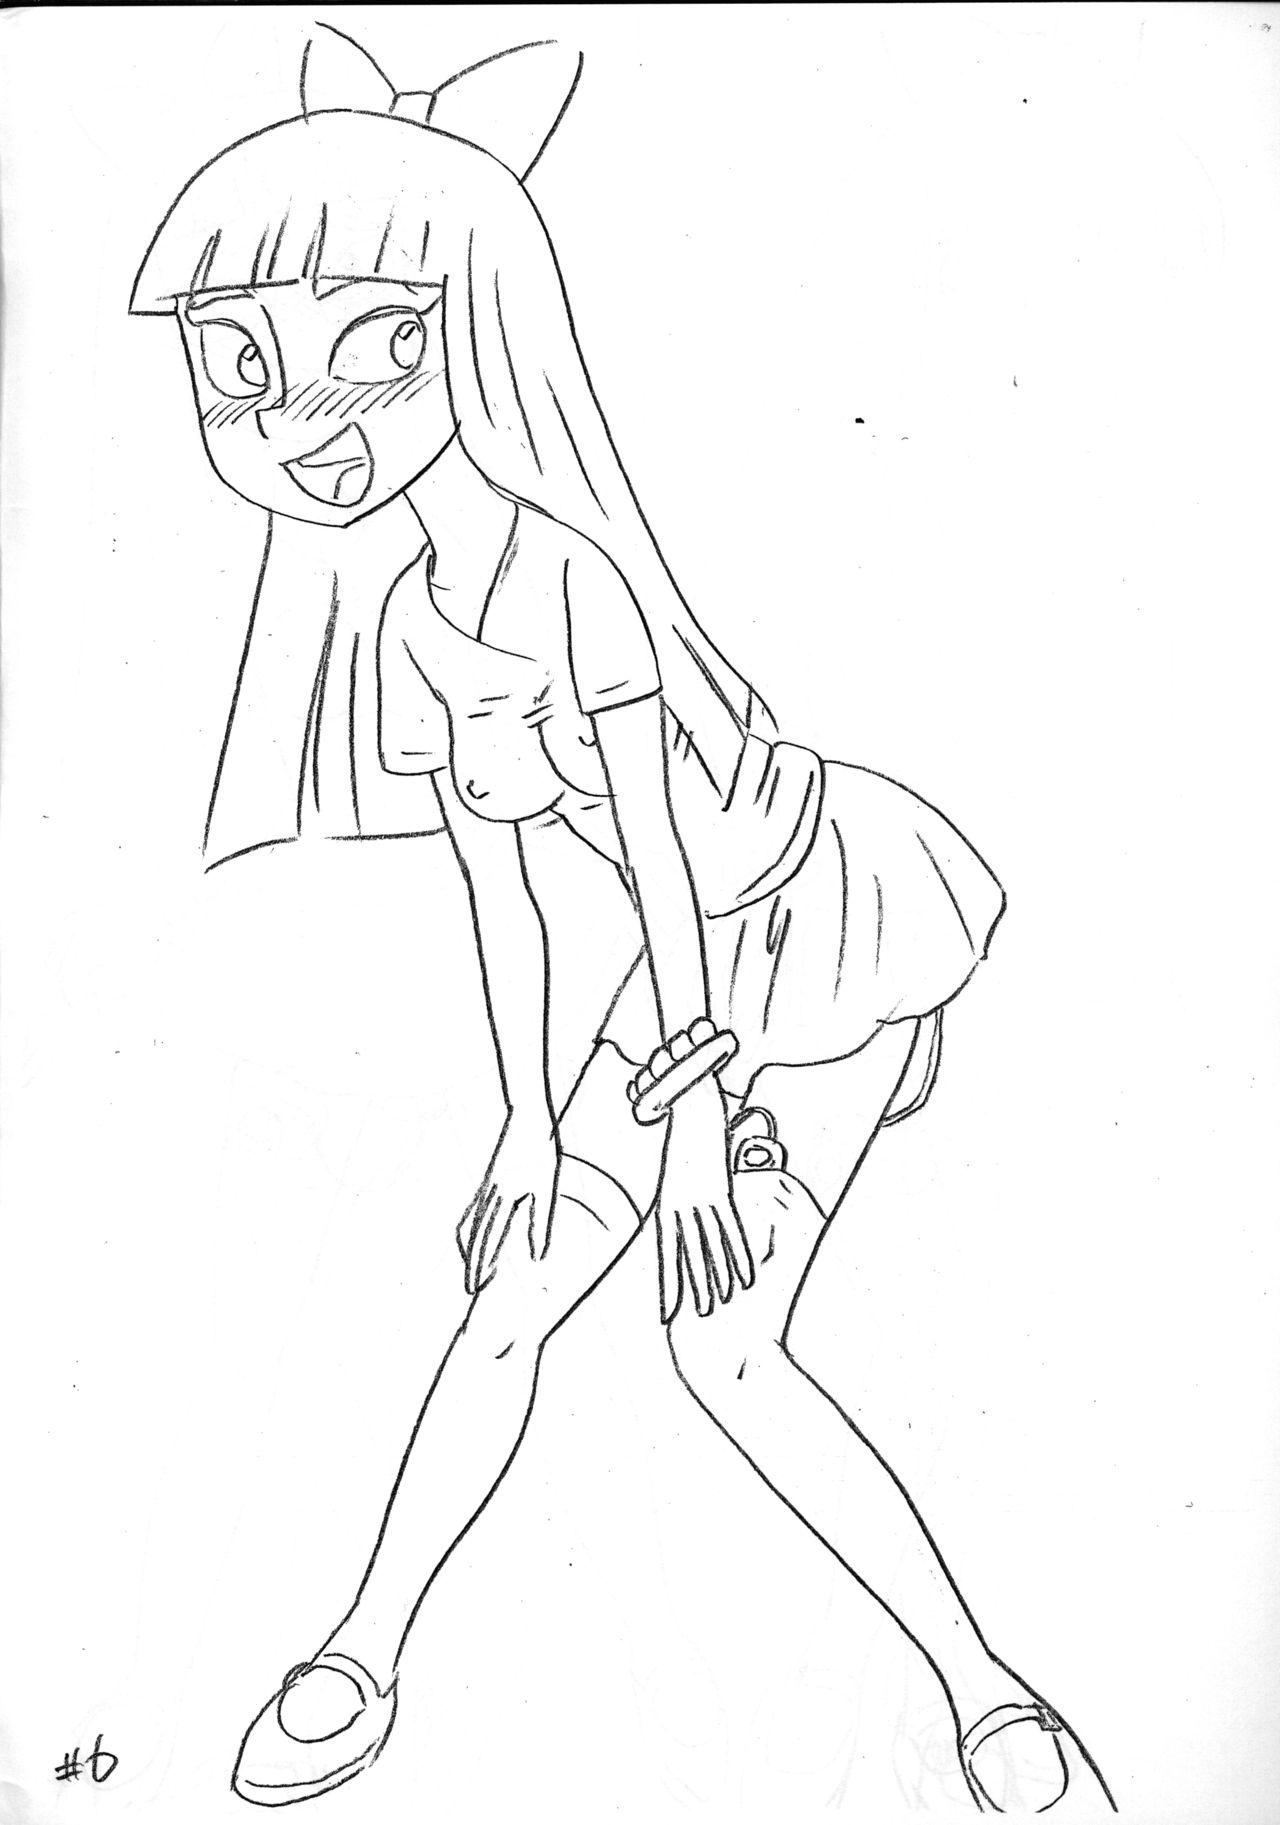 Stepsiblings Psychosomatic Counterfeit Ex: Stacy in A.S. - Phineas and ferb Bikini - Page 5